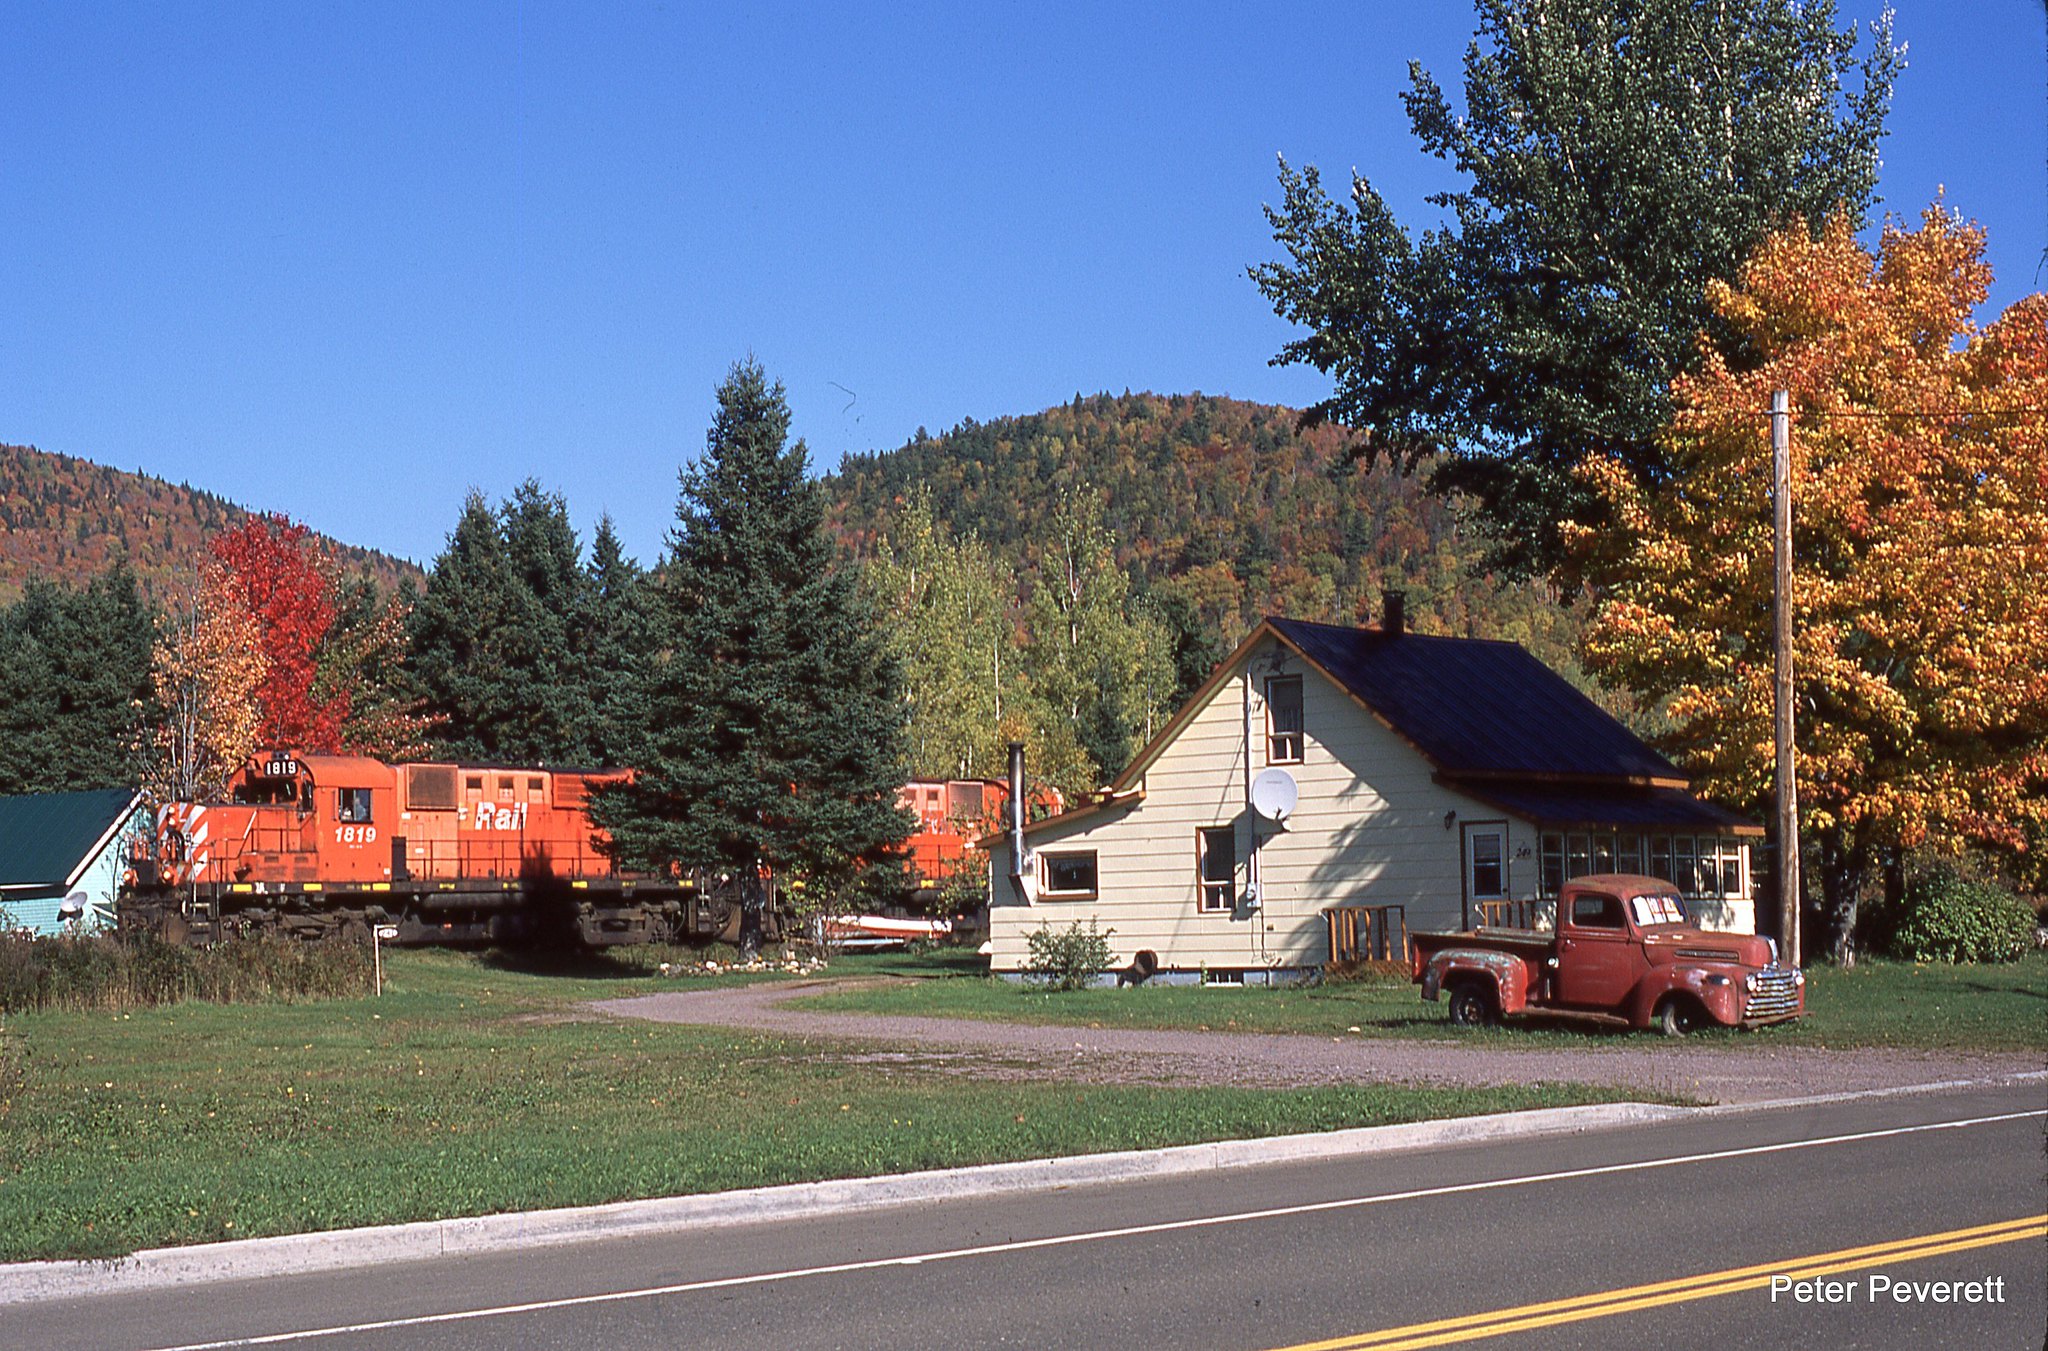 Chaleur Bay RS-18 # 1819, 1849 are westbound passing a old truck for sale in front of a house in Pointe-a-la-Croix, Quebec Oct. 5, 2010